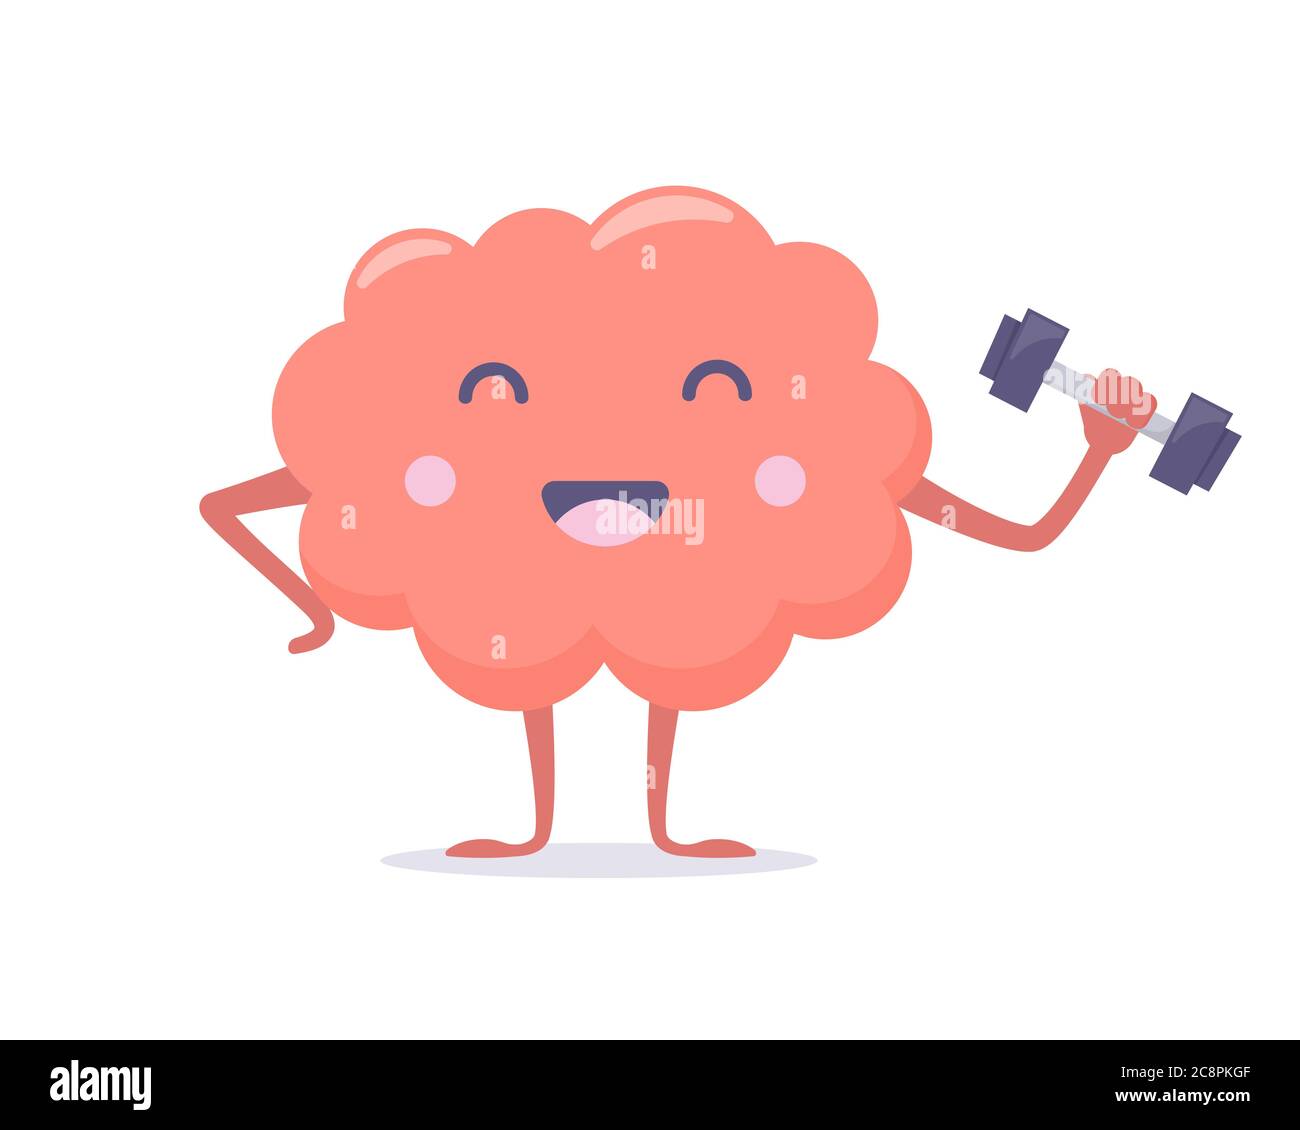 Cute pink brain character with dumbbell. Mental health concept. Brain training exercise. Vector illustration in flat style Stock Vector